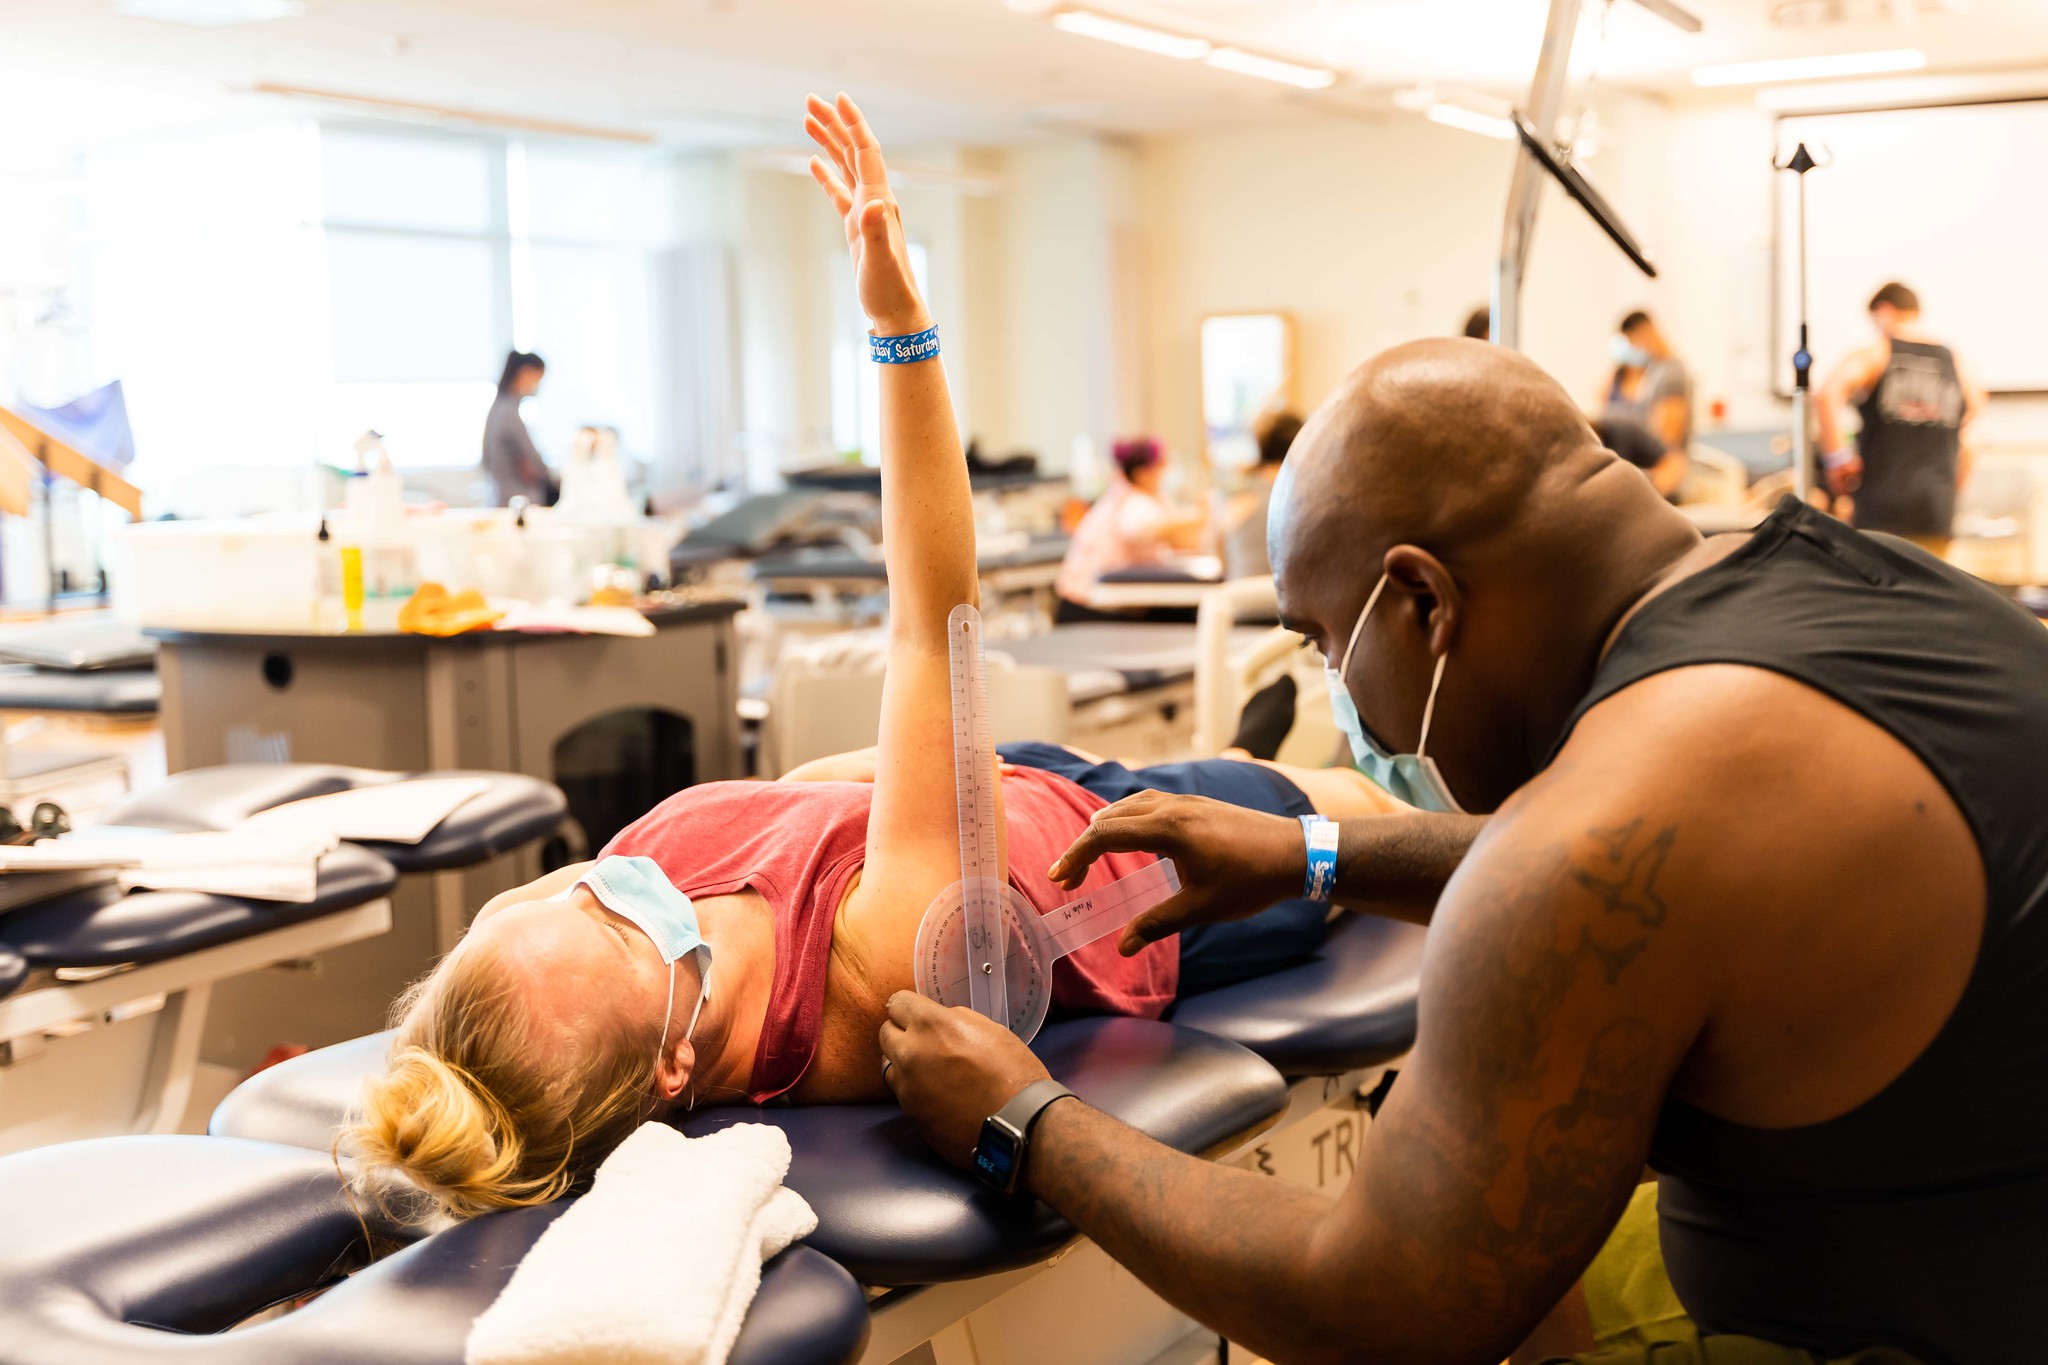 A woman laying on a physical therapy table lifts her arm while a therapist measures her the range of motion in her shoulder